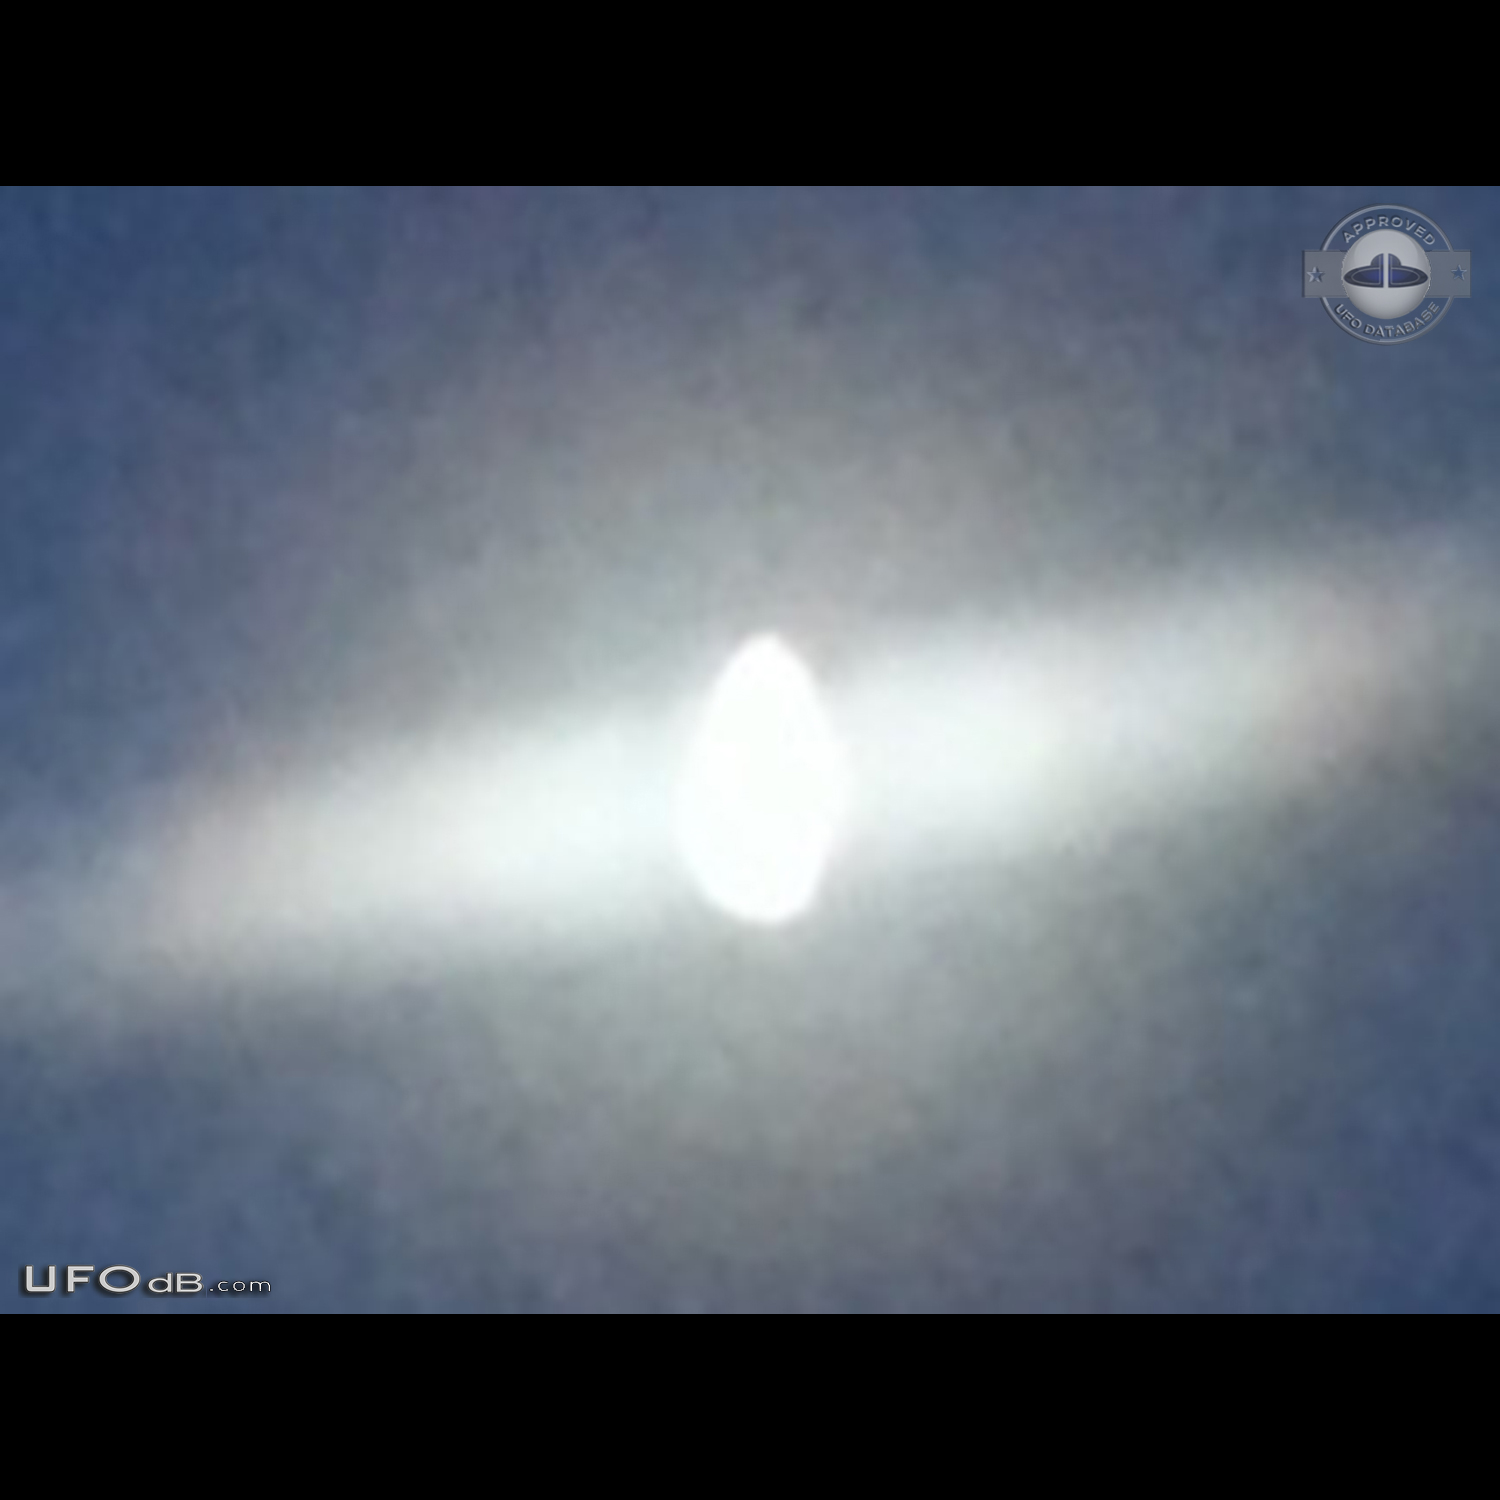 Bright Glowing Egg Shaped UFO over Bay of Plenty New Zealand 2012 UFO Picture #692-1